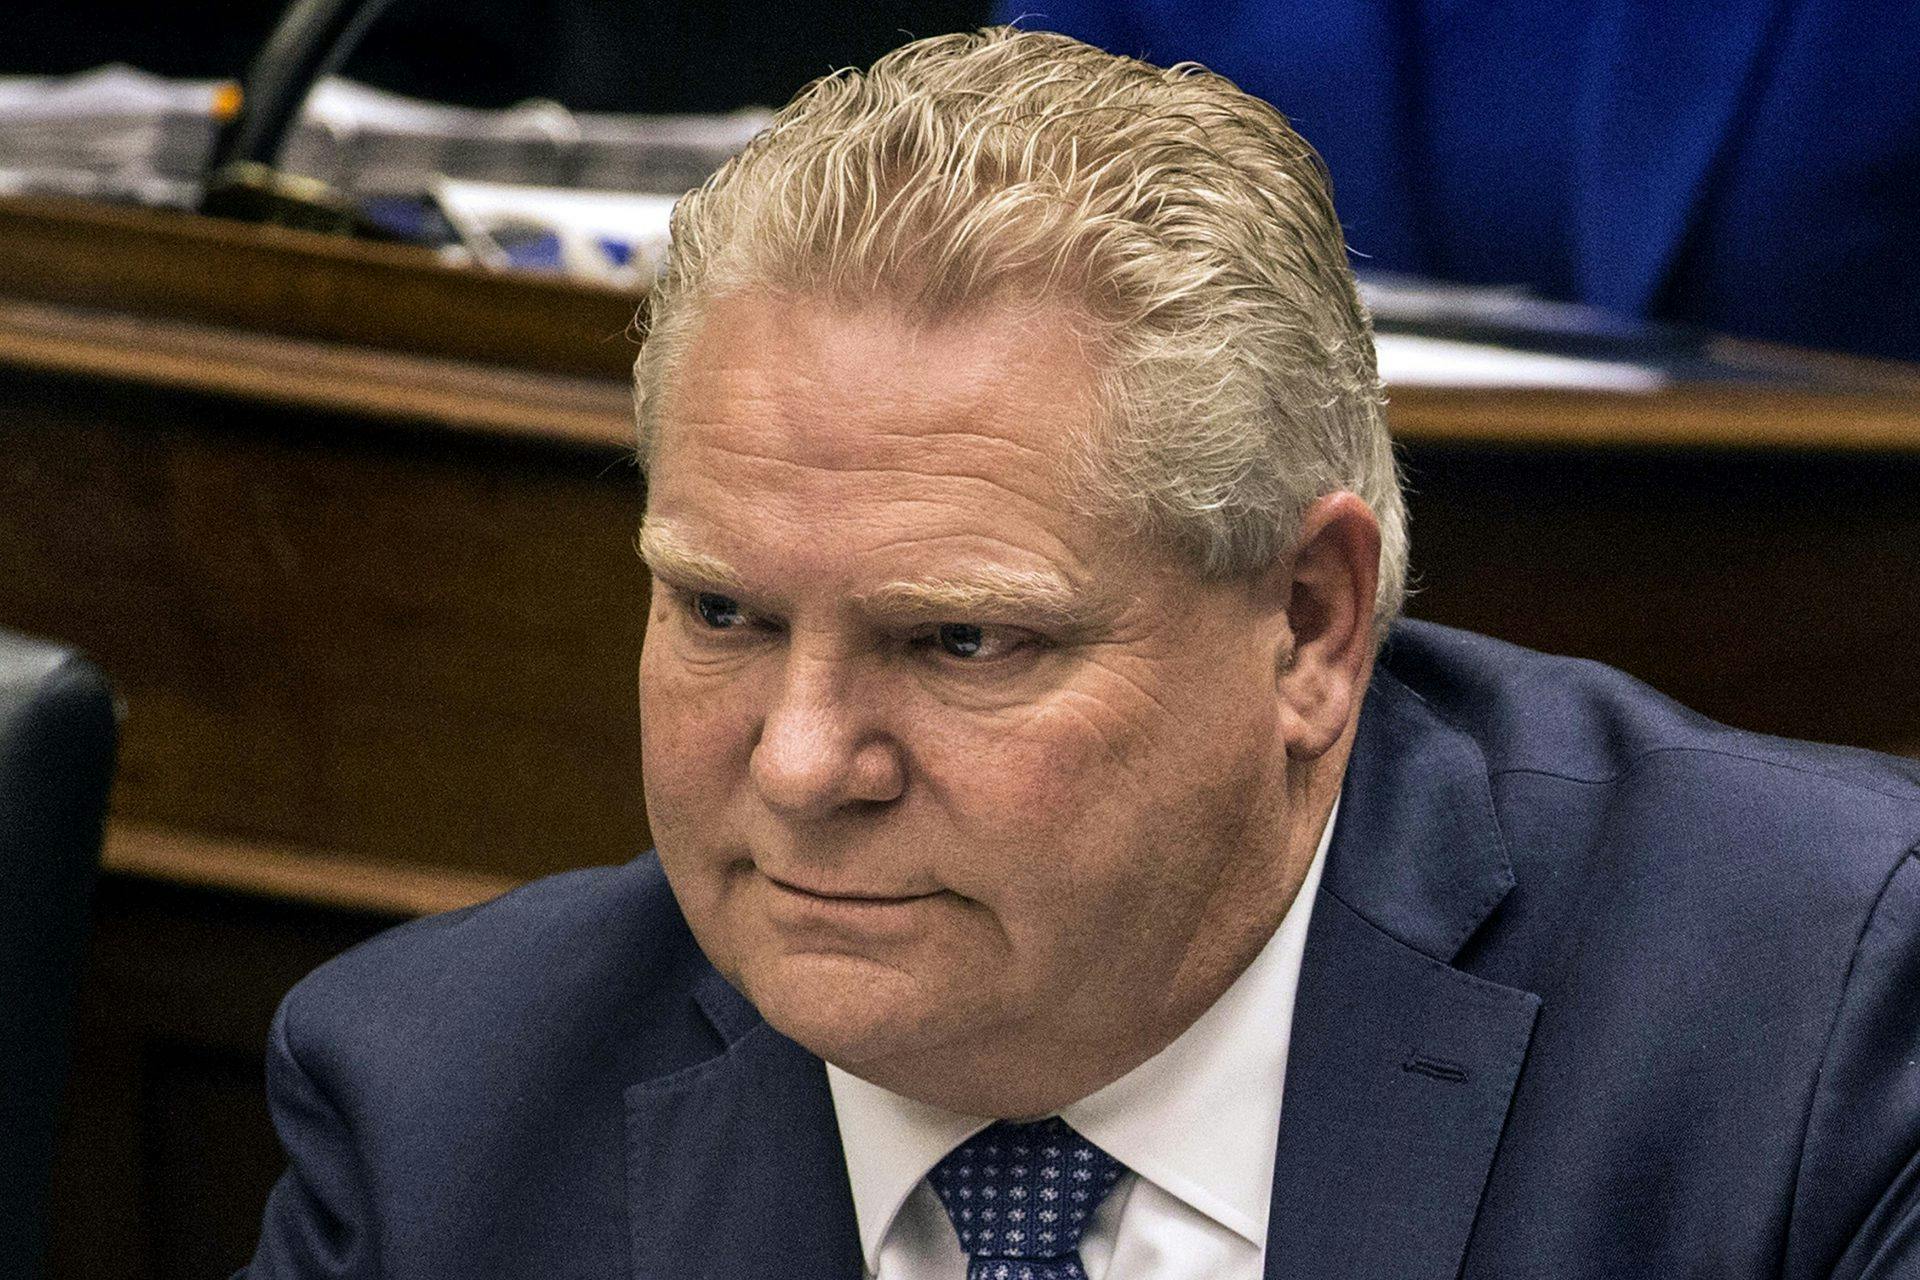 ‘General strike’ against Doug Ford prompts criticism from left and right